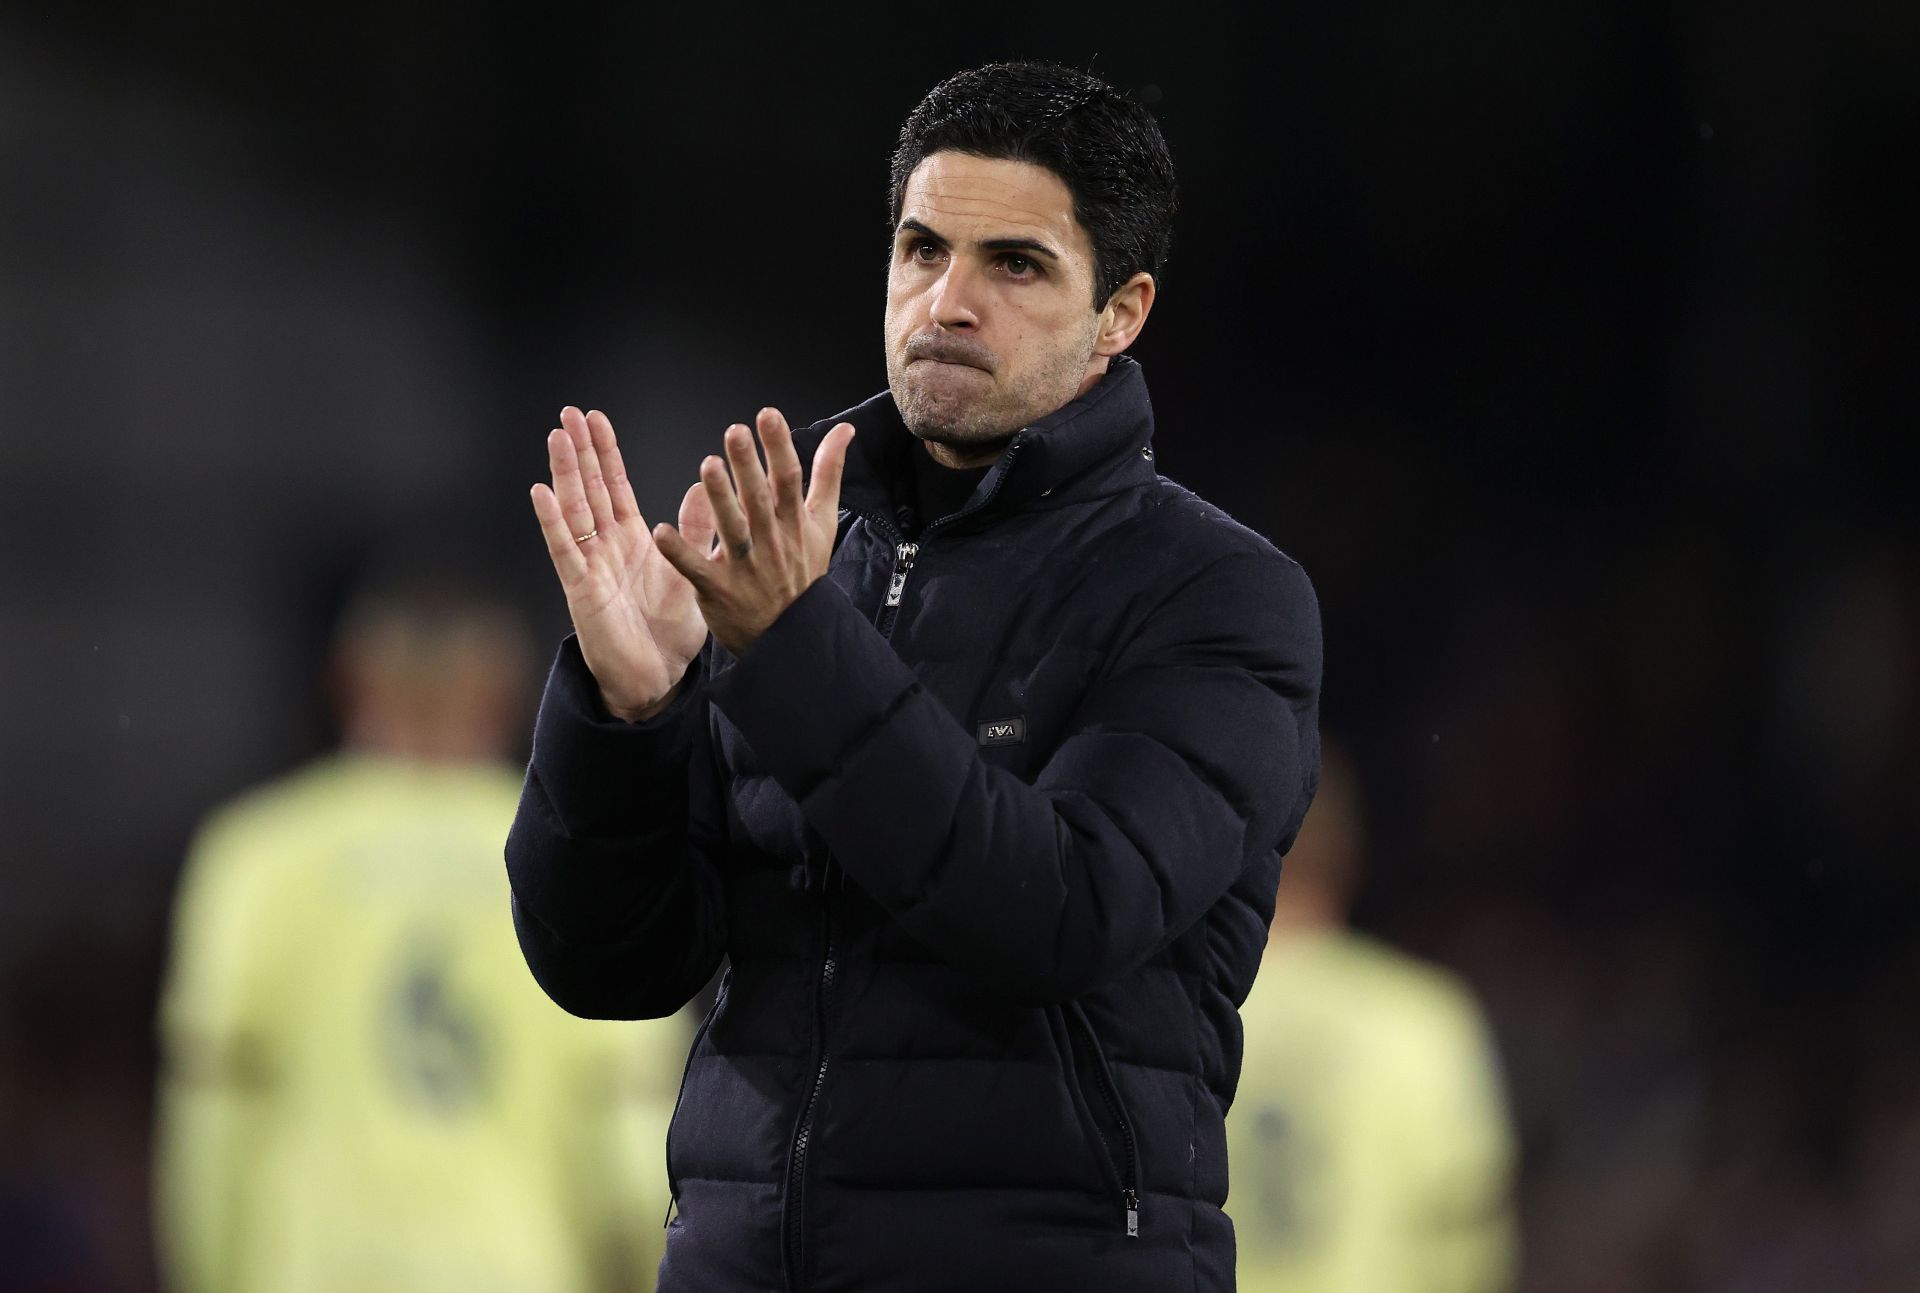 Arsenal manager Mikel Arteta has his eyes on third place.